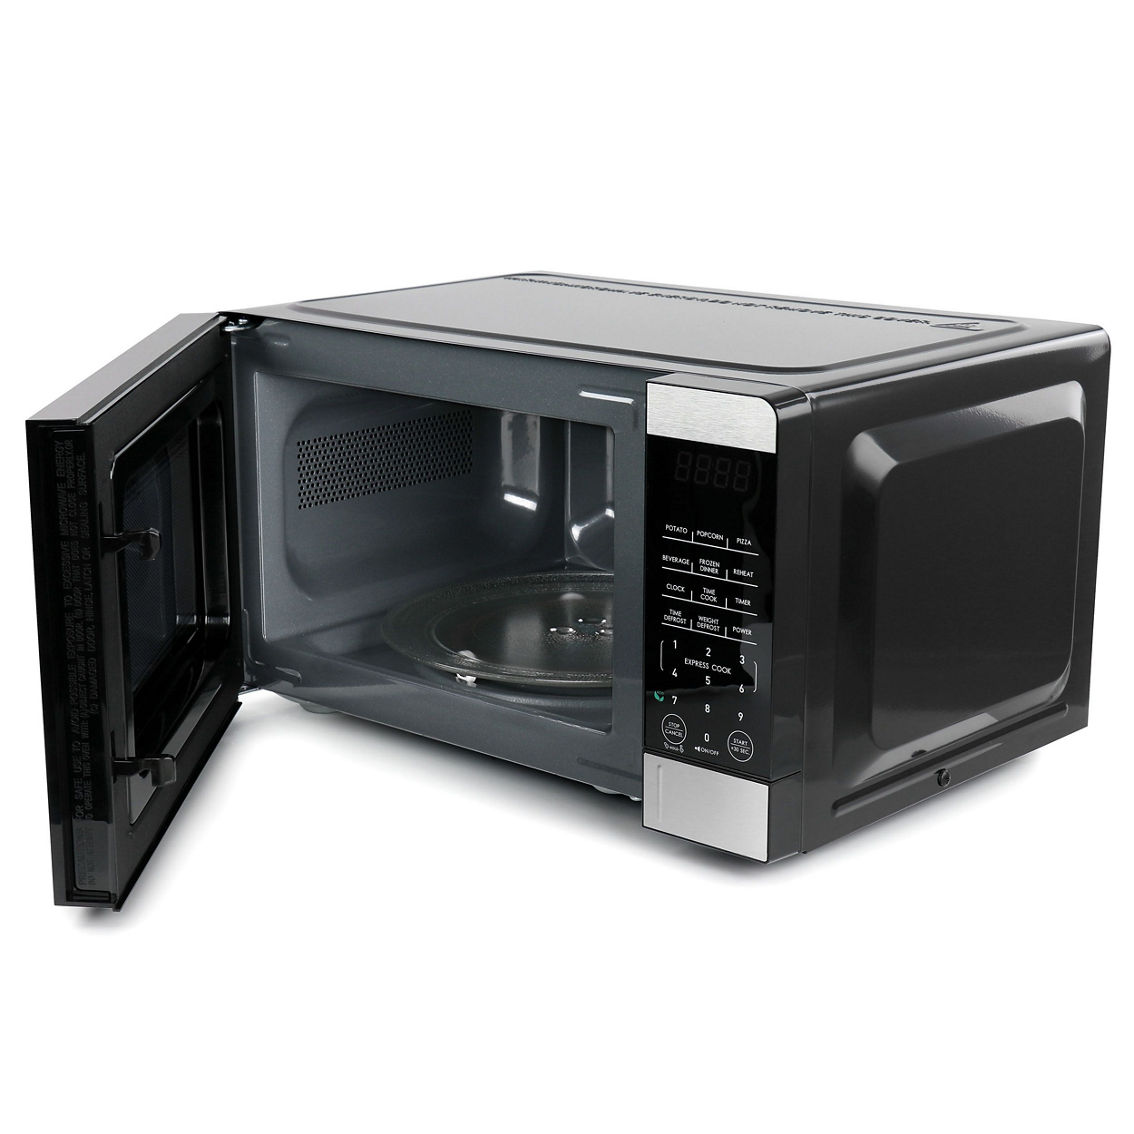 Galanz 0.7 Cu. Ft. 700 Watt Countertop Microwave Oven in Silver - Image 2 of 5